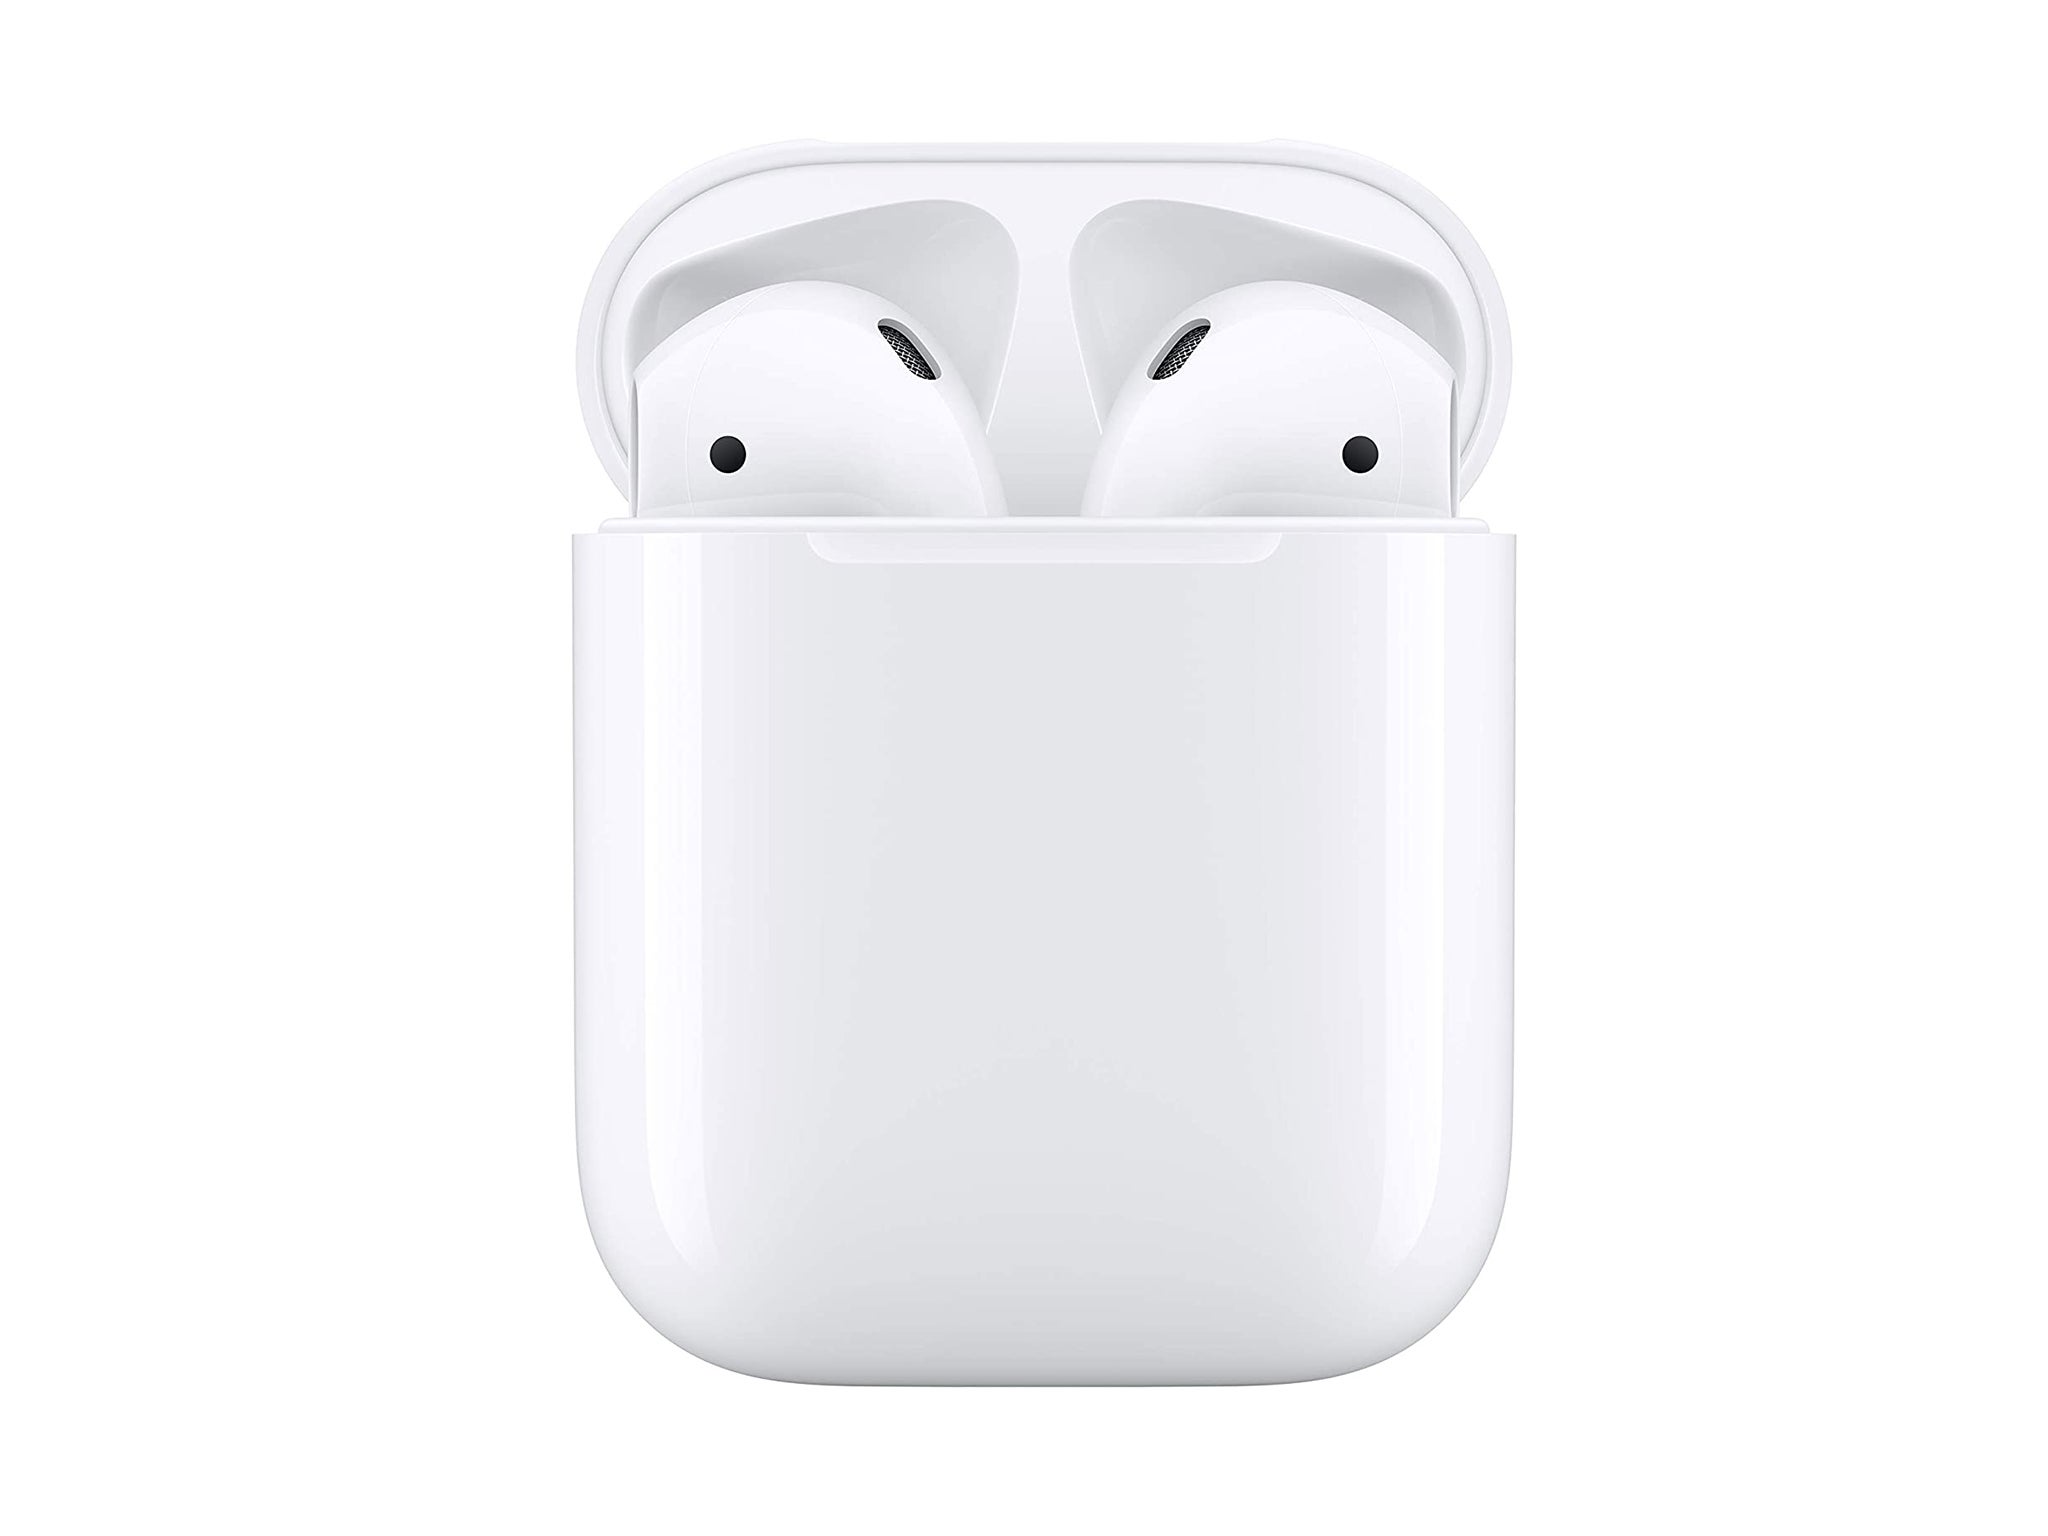 black friday, bose, airpods, indybest, amazon, android, black friday, best cyber monday headphones and earbuds deals on airpods, bose, sony and more